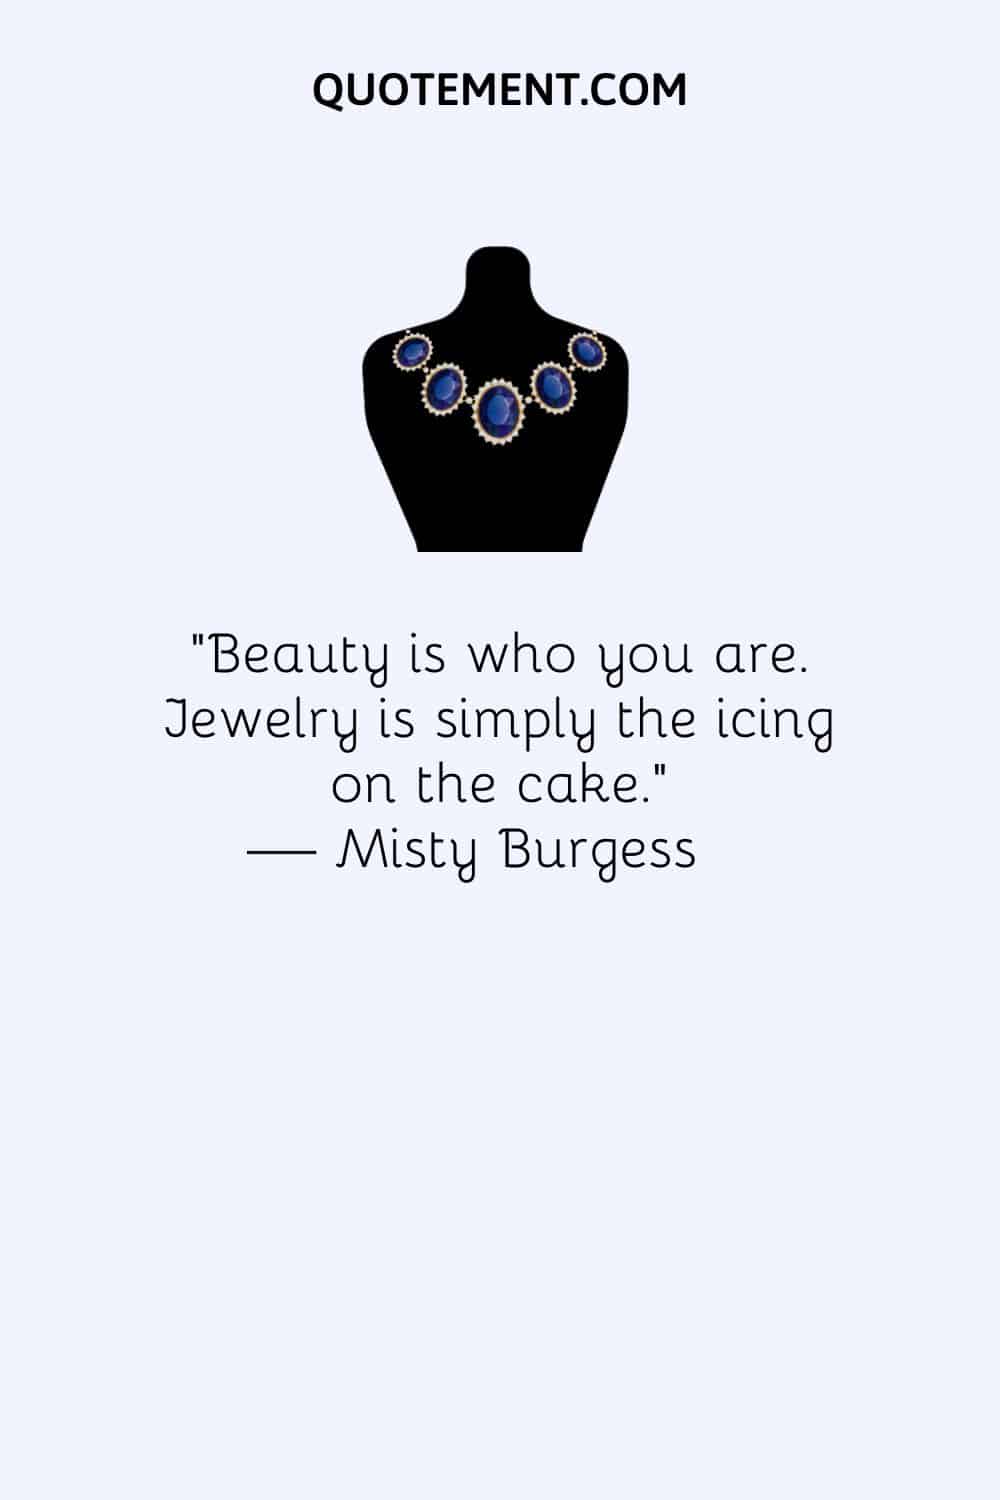 Beauty is who you are. Jewelry is simply the icing on the cake